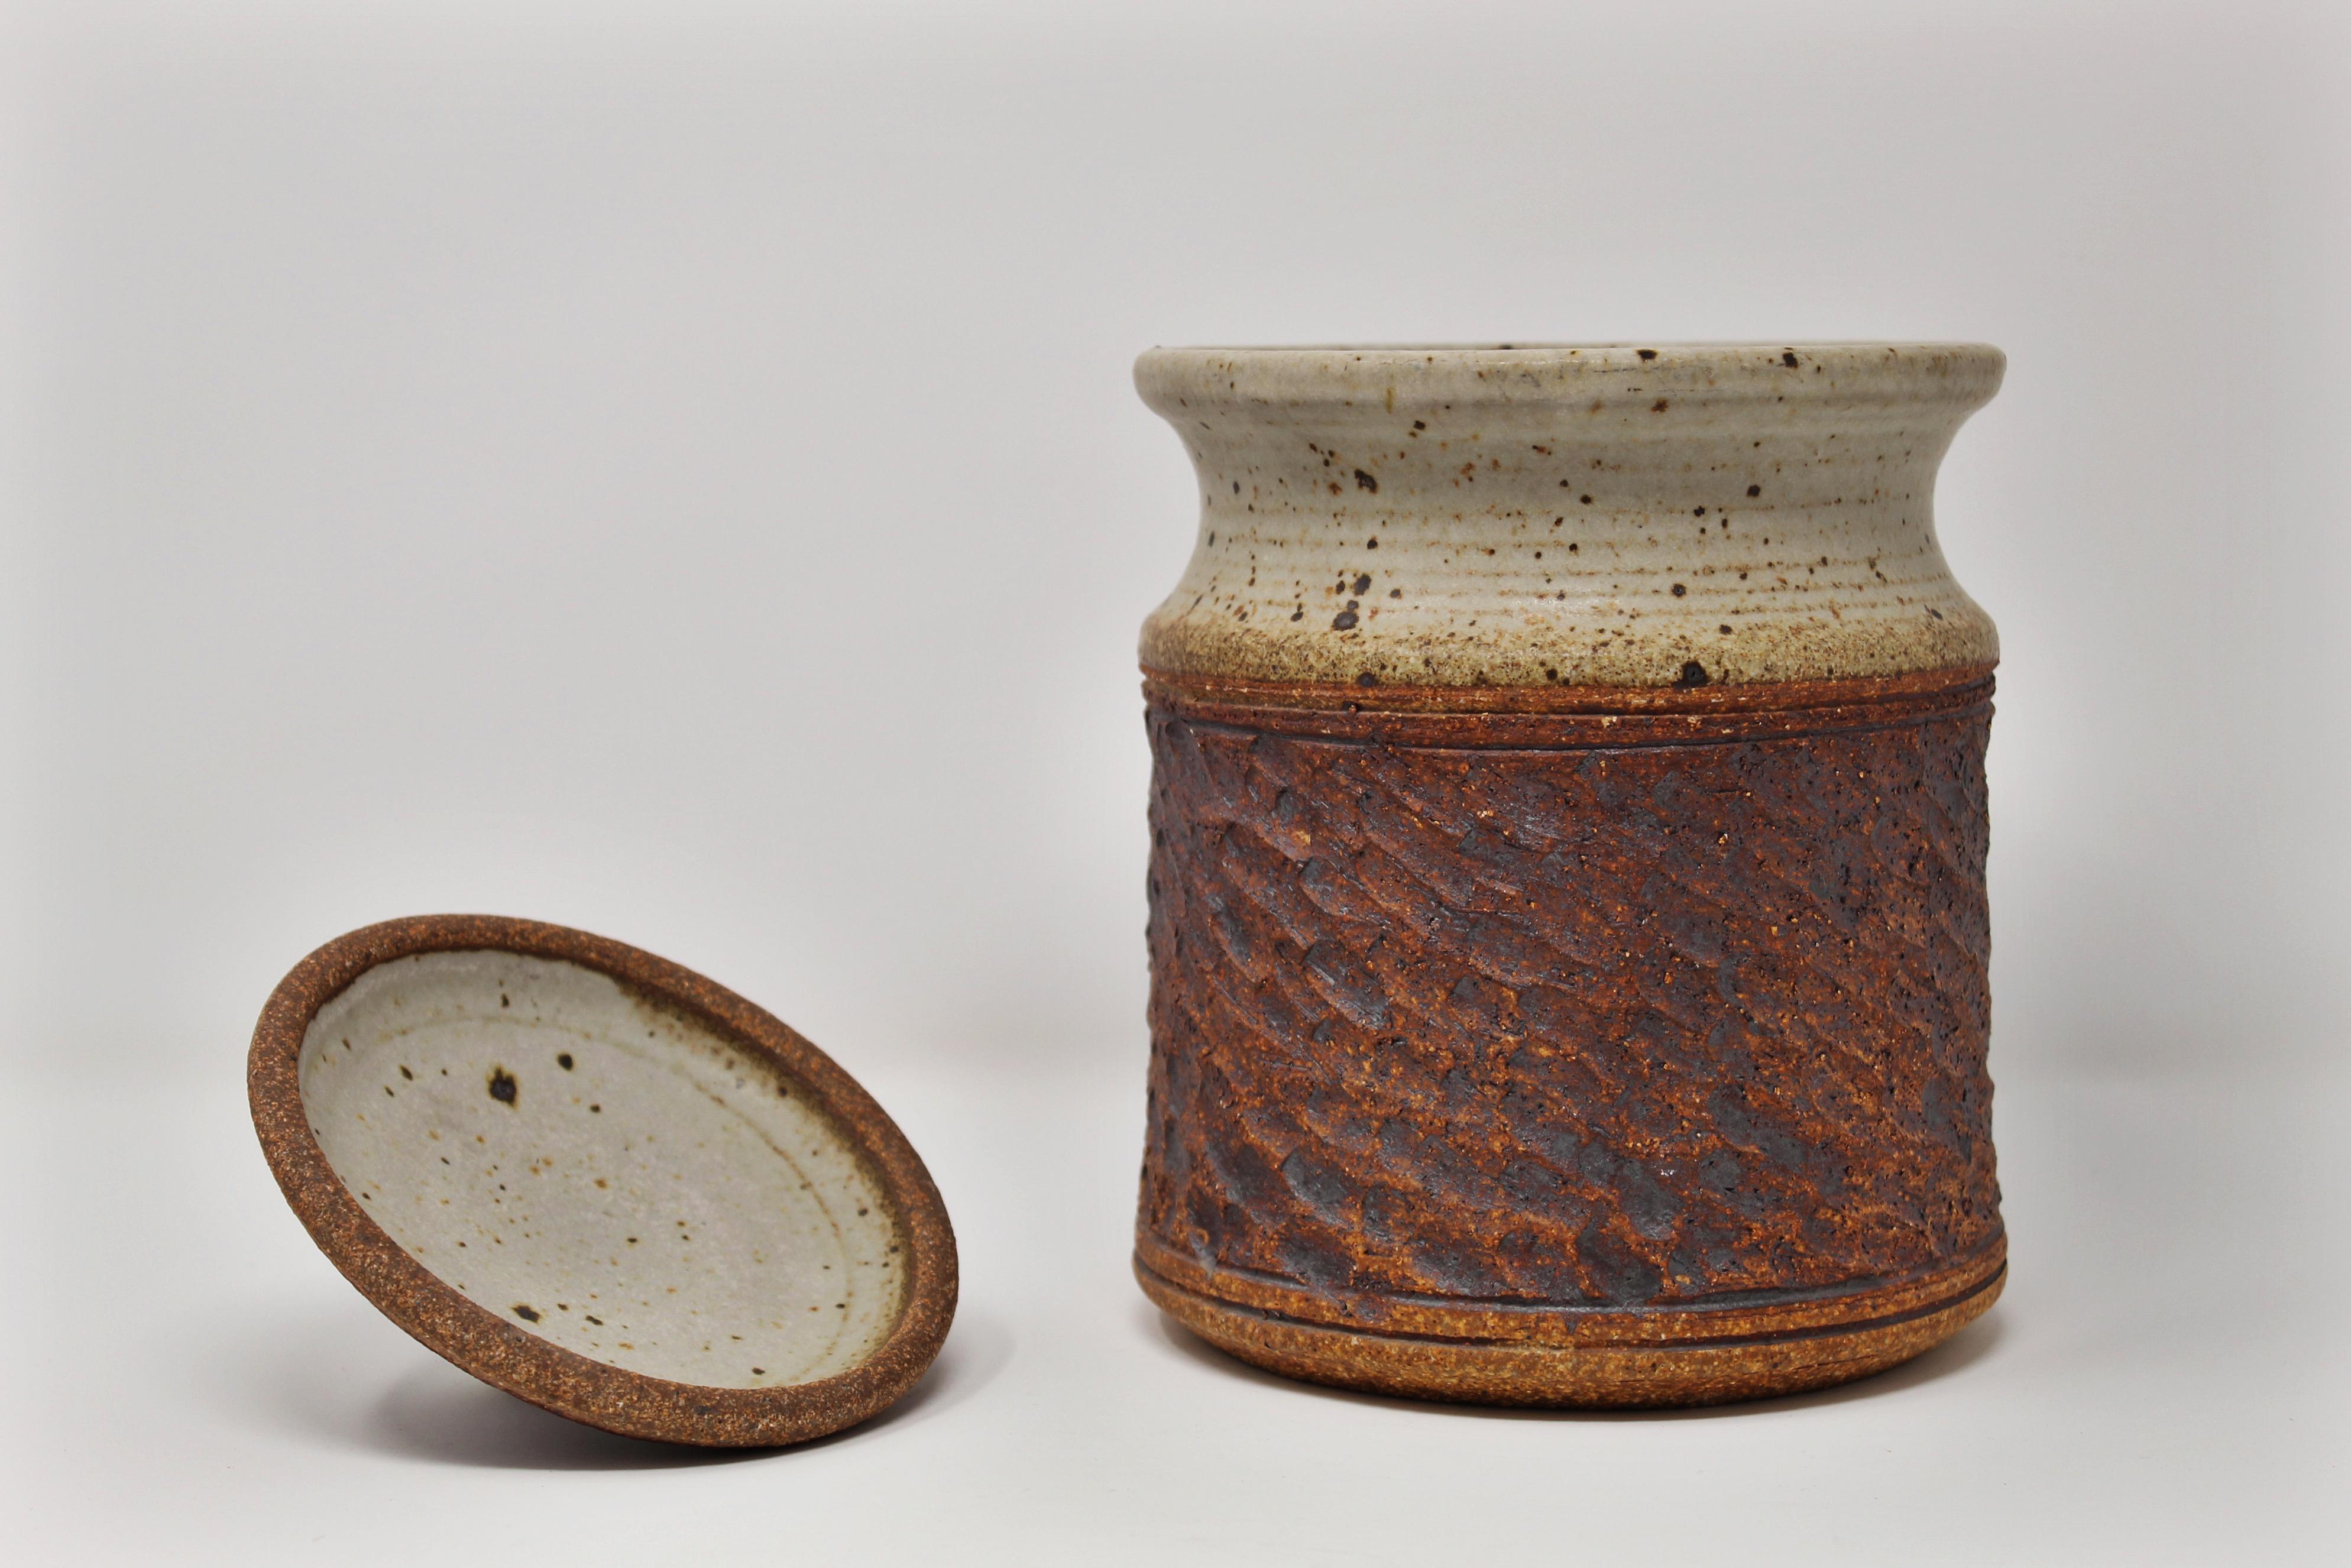 Beautiful Studio Pottery ceramic vessel with lid. Exceptional earth tones and great combination of texture. Very nice midcentury California design decorative object.
   